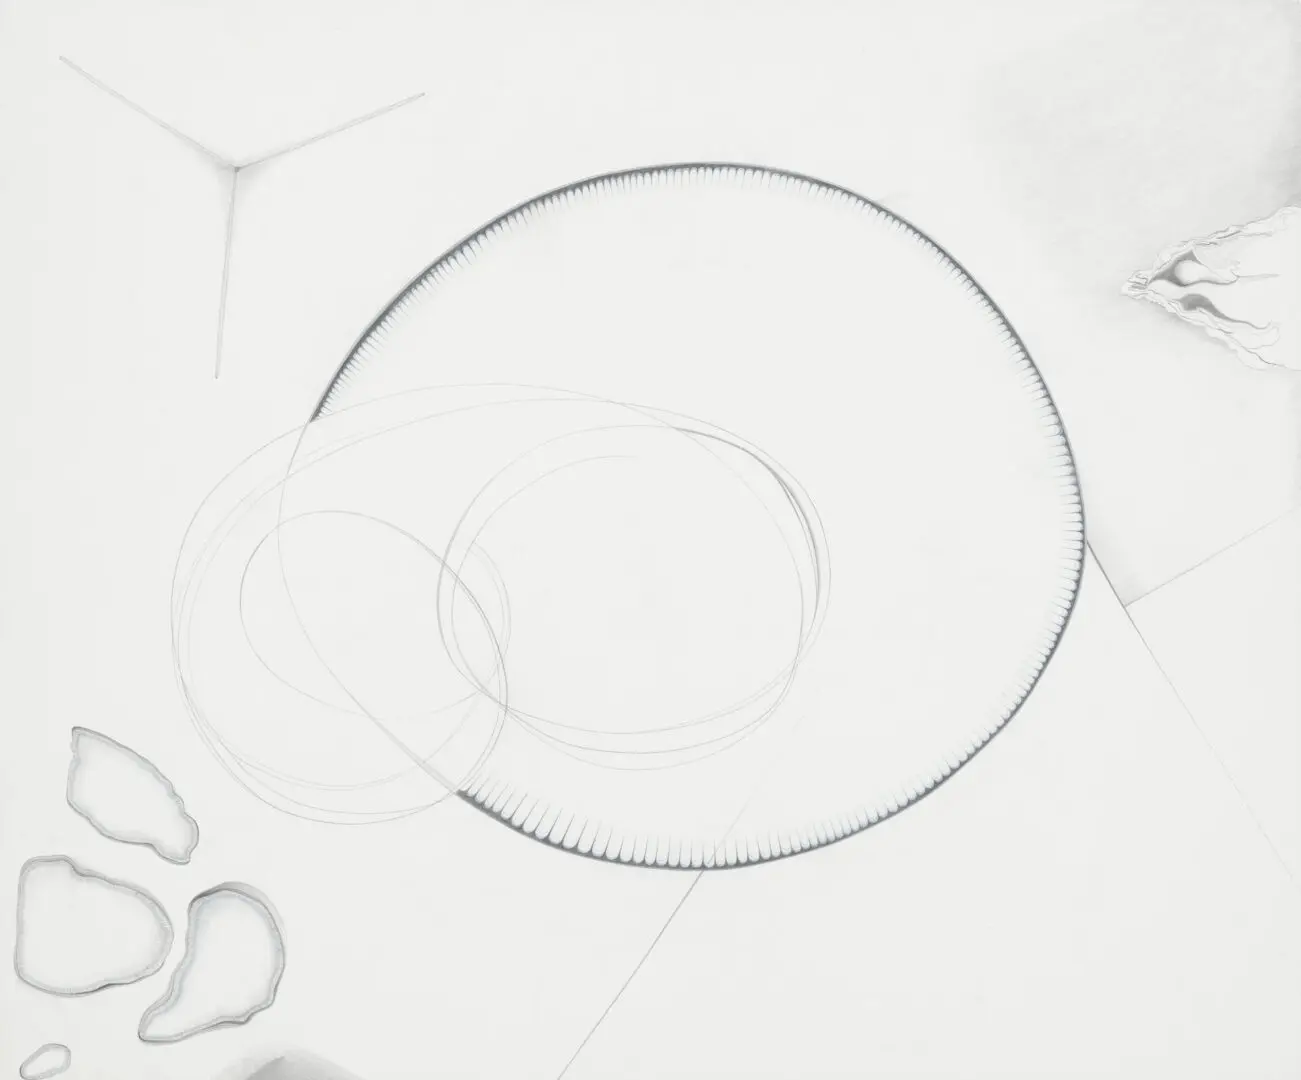 A white table with some wires and a circle